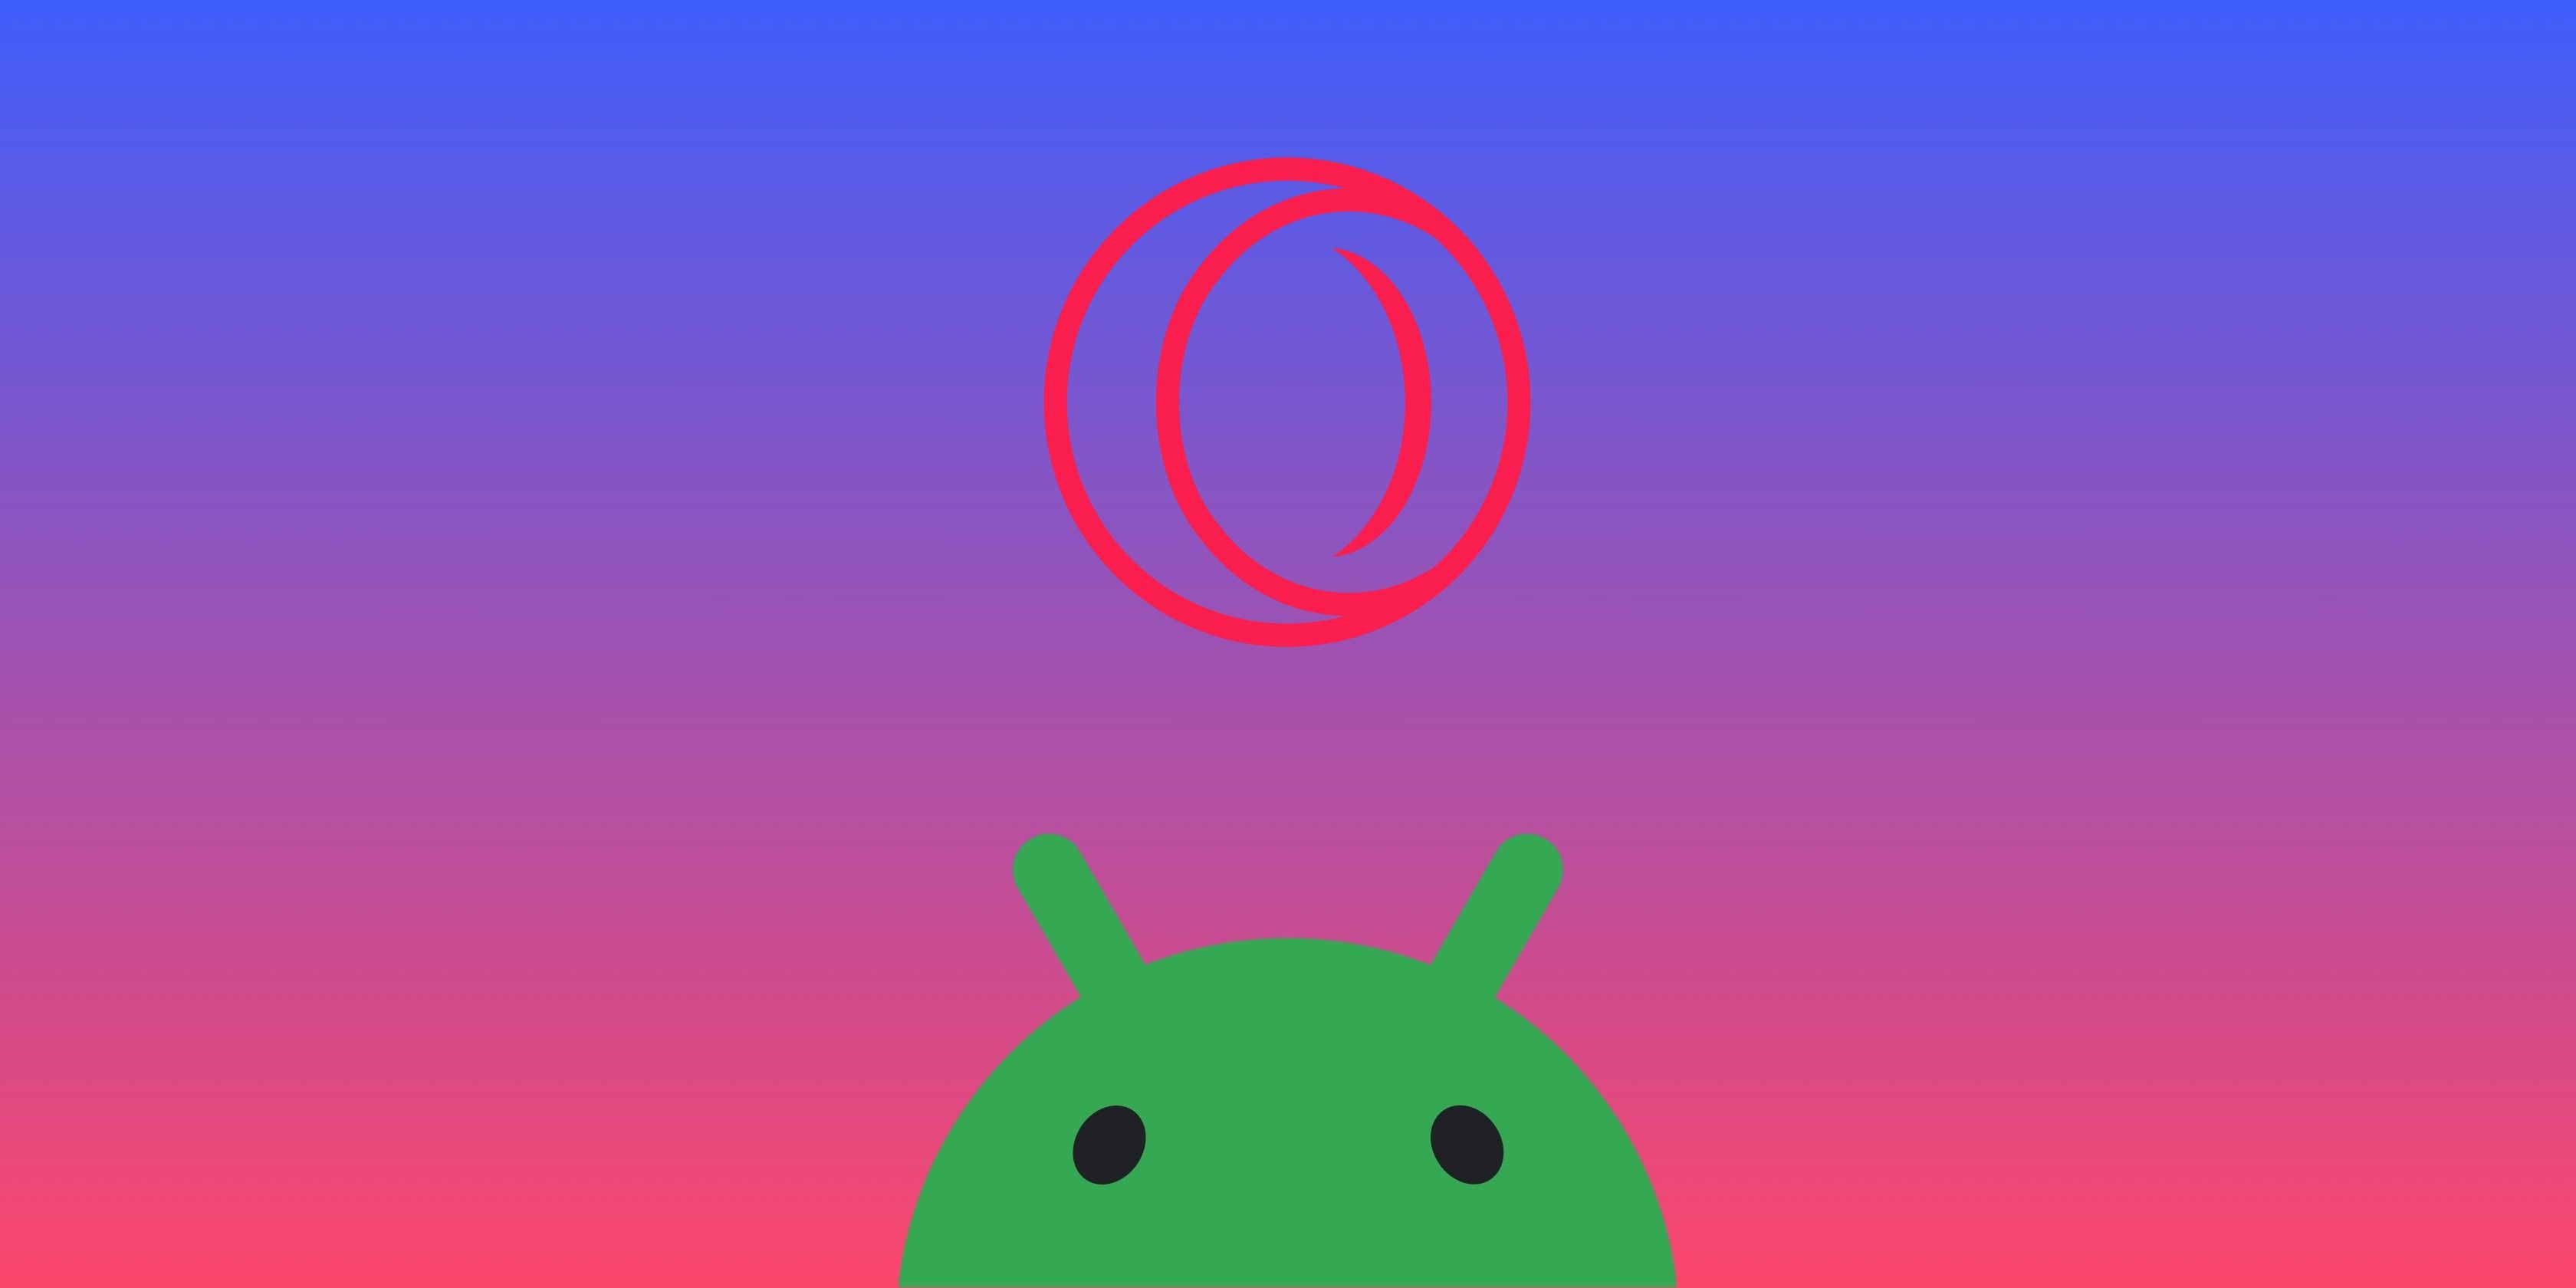 Opera GX and Android Logo on Gradient Background